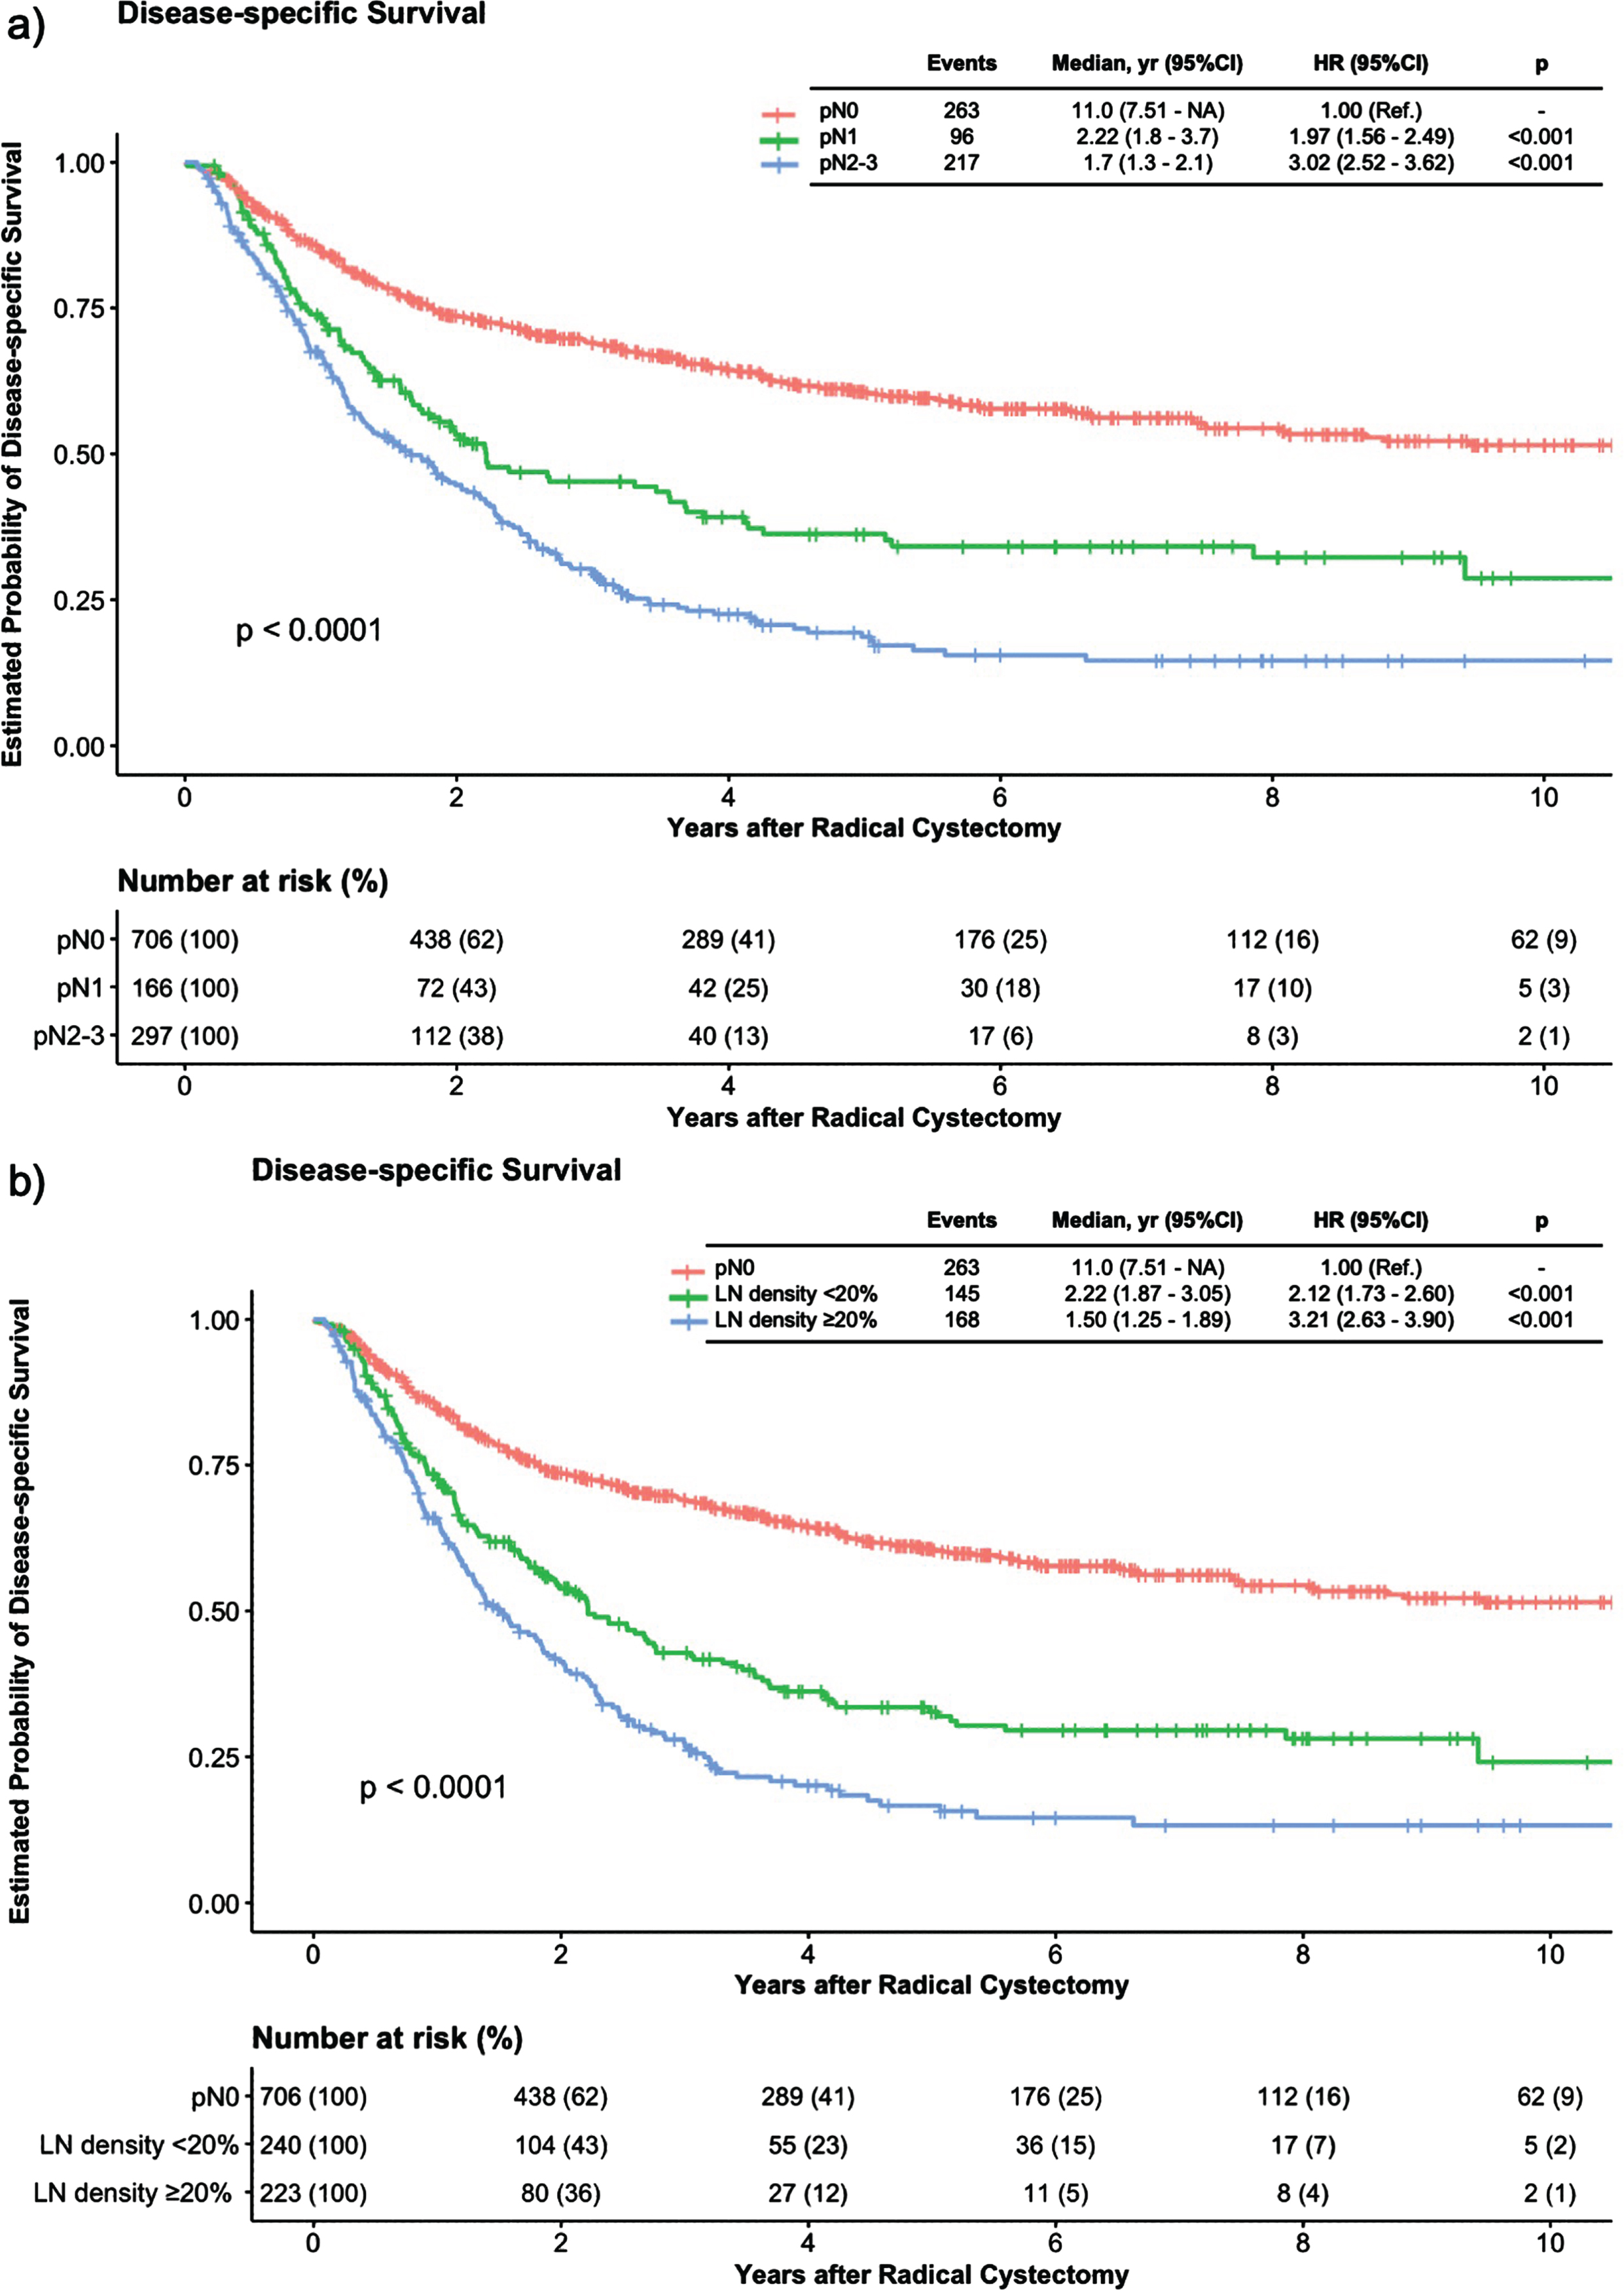 (a) Kaplan-Meier survival curves of disease-specific survival (log-rank, p < 0.0001) stratified by pN status among 1169 patients with non-metastatic bladder cancer undergoing radical cystectomy and pelvic lymph node dissection are shown. Univariable Cox’s regression analysis assessed the HRs with their 95% CI: pN0 vs. pN1 (HR 1.97, 95% CI 1.56–2.49, p < 0.001), pN0 vs. pN2-3 (HR 3.02, 95% CI 2.52–3.62, p < 0.001), respectively. (b) Kaplan-Meier survival curves of disease-specific survival (log-rank, p < 0.0001) stratified by LN-density group among 1169 patients with non-metastatic bladder cancer undergoing radical cystectomy and pelvic lymph node dissection are shown. Univariable Cox’s regression analysis assessed the HRs with their 95% CI: pN0 vs. LN-density <20% (HR 2.12, 95% CI 1.73–2.60, p < 0.001), pN0 vs. LN-density≥20% (HR 3.21, 95% CI 2.63–3.90, p < 0.001), respectively. Abbreviations are as follows: pN: pathological nodal stage; HR hazard ratio, CI confidence interval.